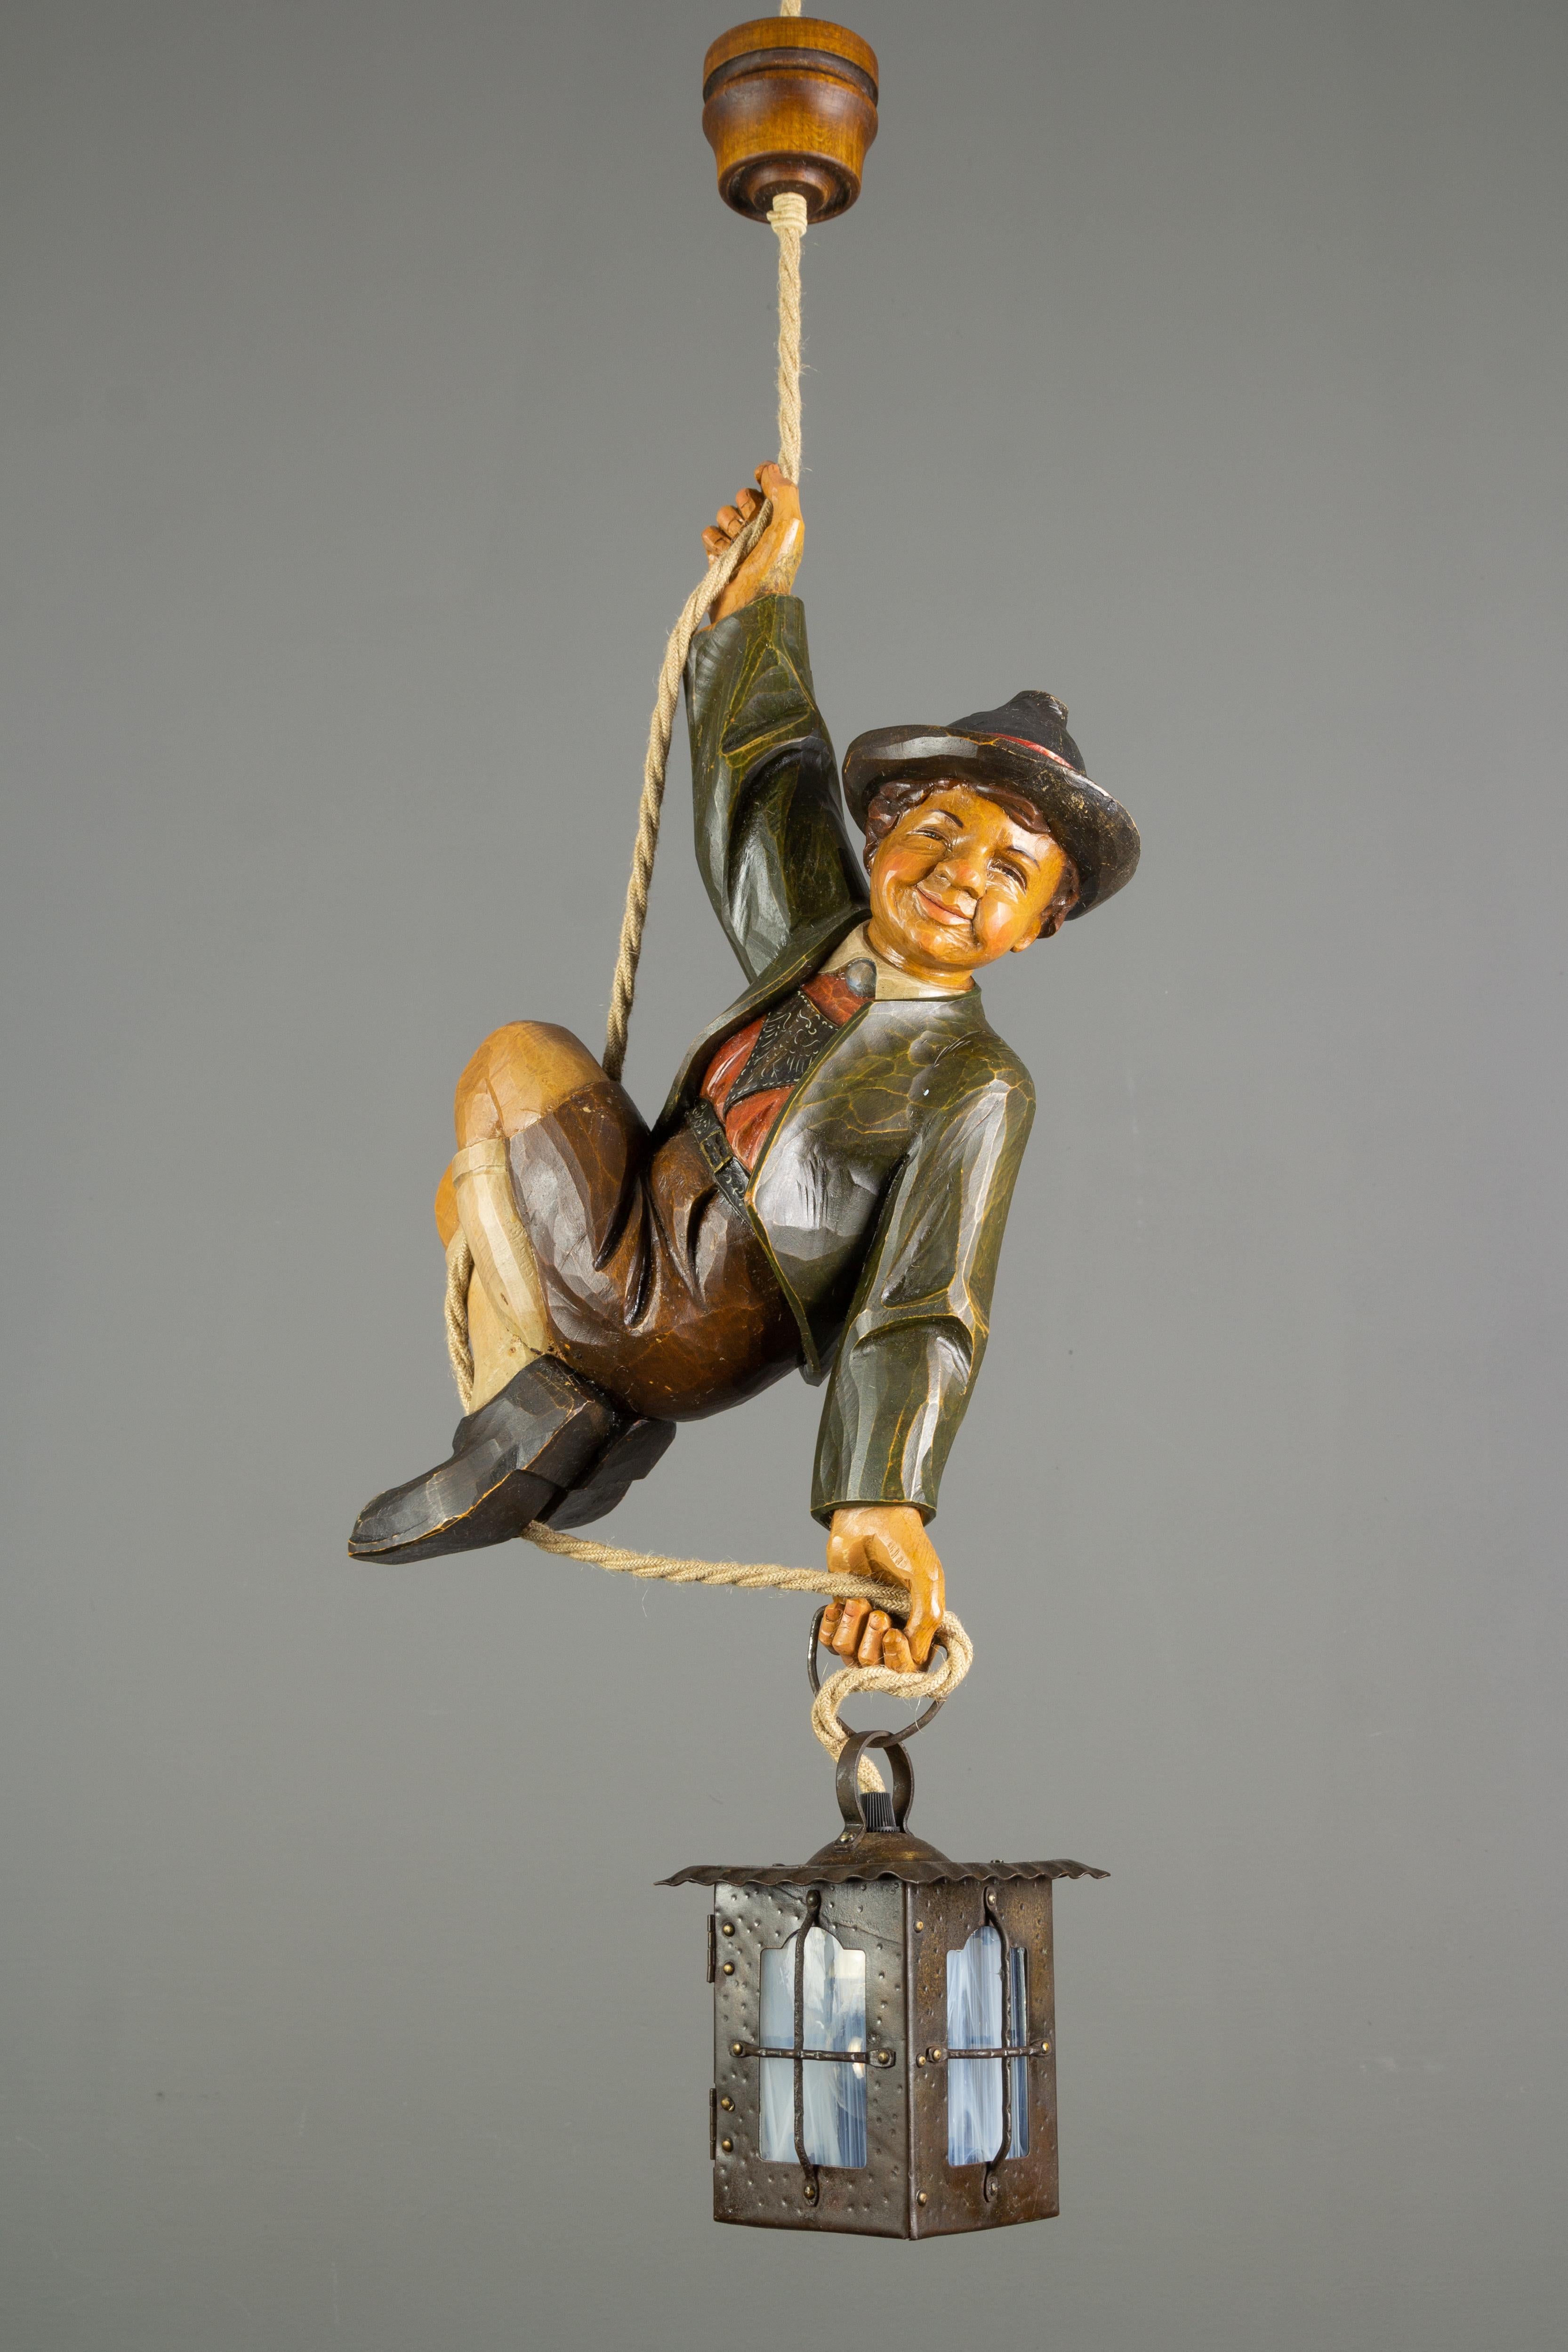 Wonderful German pendant lamp features a hand-carved figure of a smiling and cheerful mountain climber in beautifully hand-painted Bavarian traditional clothing in brown, green, white, and red colors. The detailed carved wooden figure wears a hat